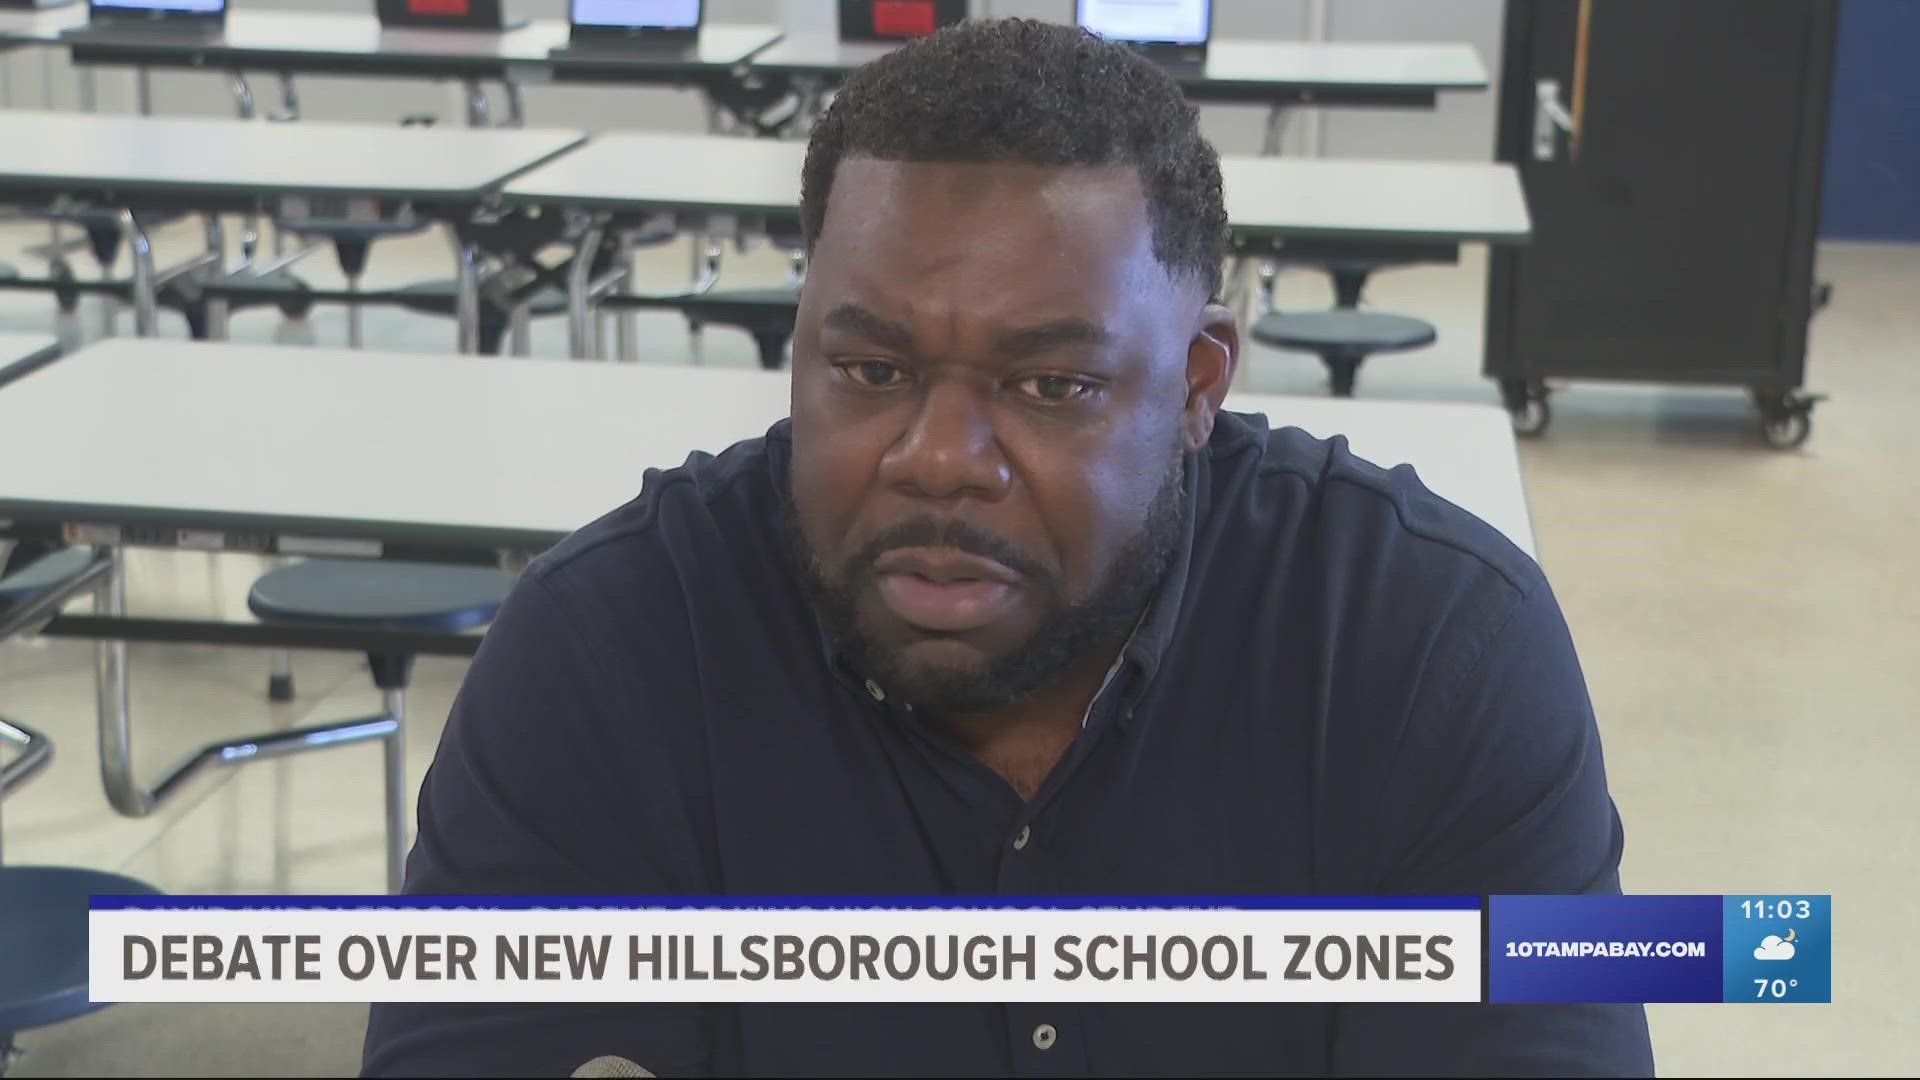 One week ago, the Hillsborough County School Board appeared deeply divided on the latest school rezoning option.